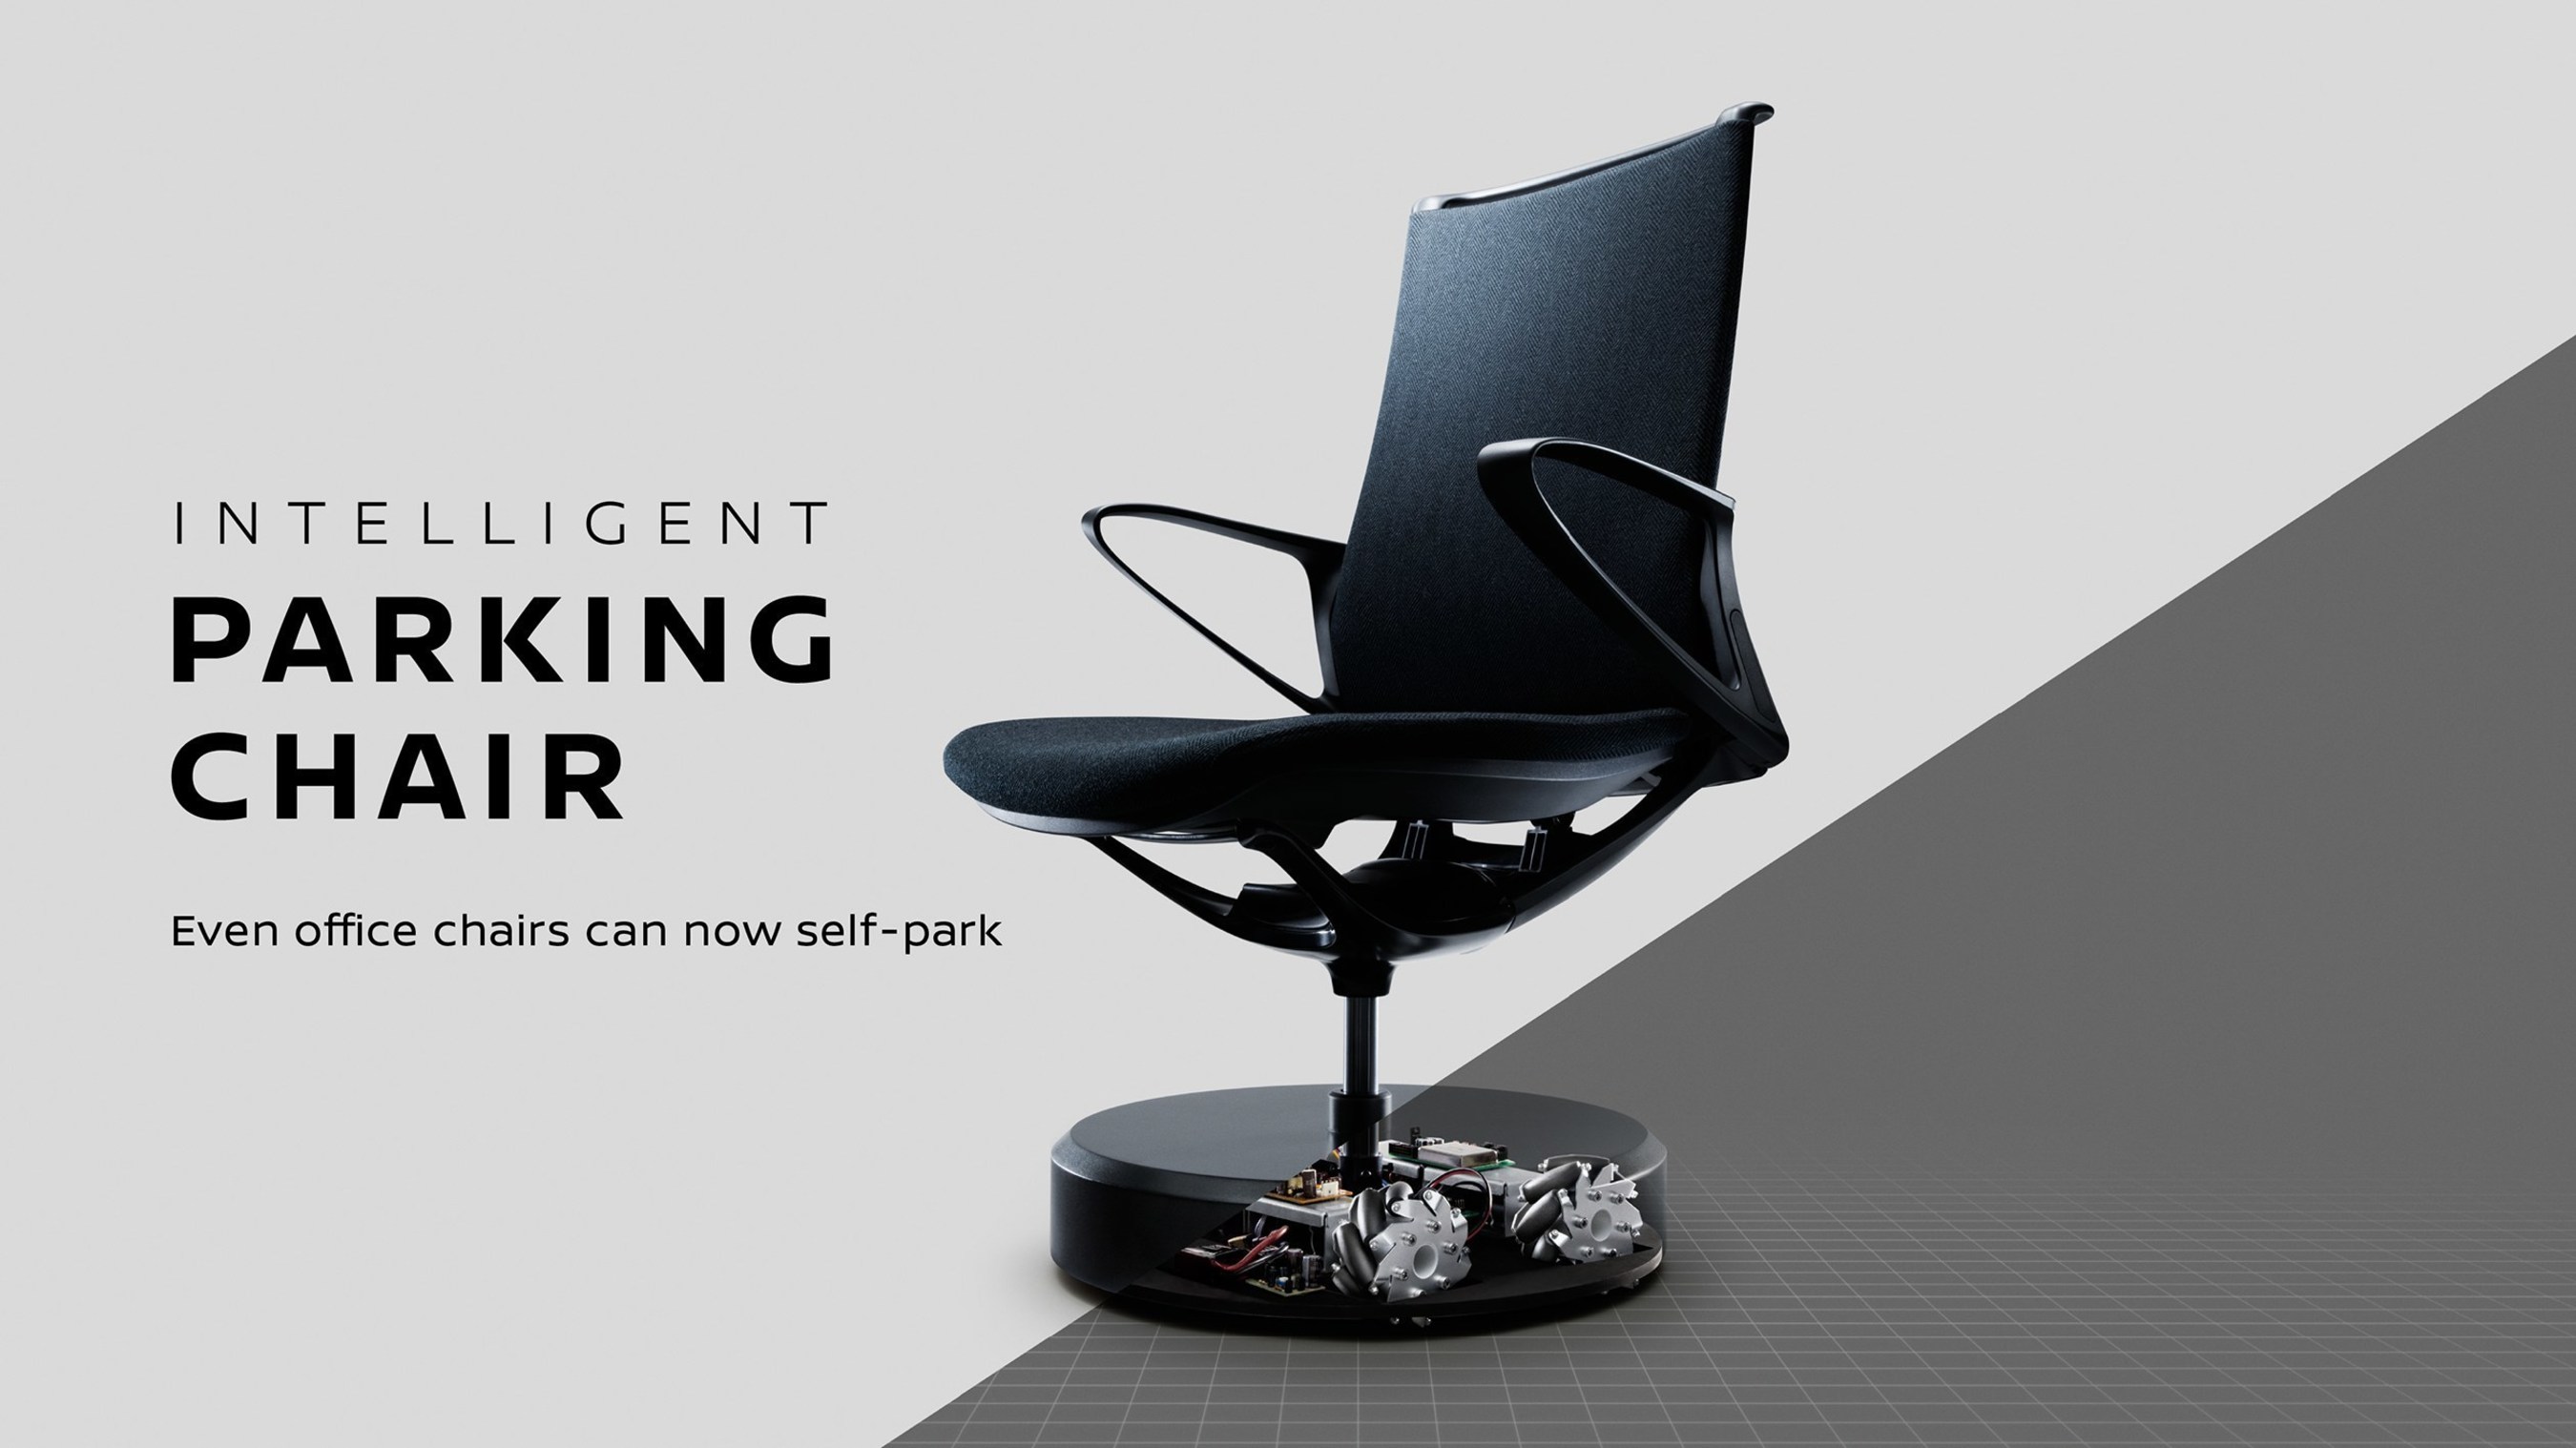 The "Intelligent Parking Chair" is inspired by Nissan's "Intelligent Park Assist" technology.